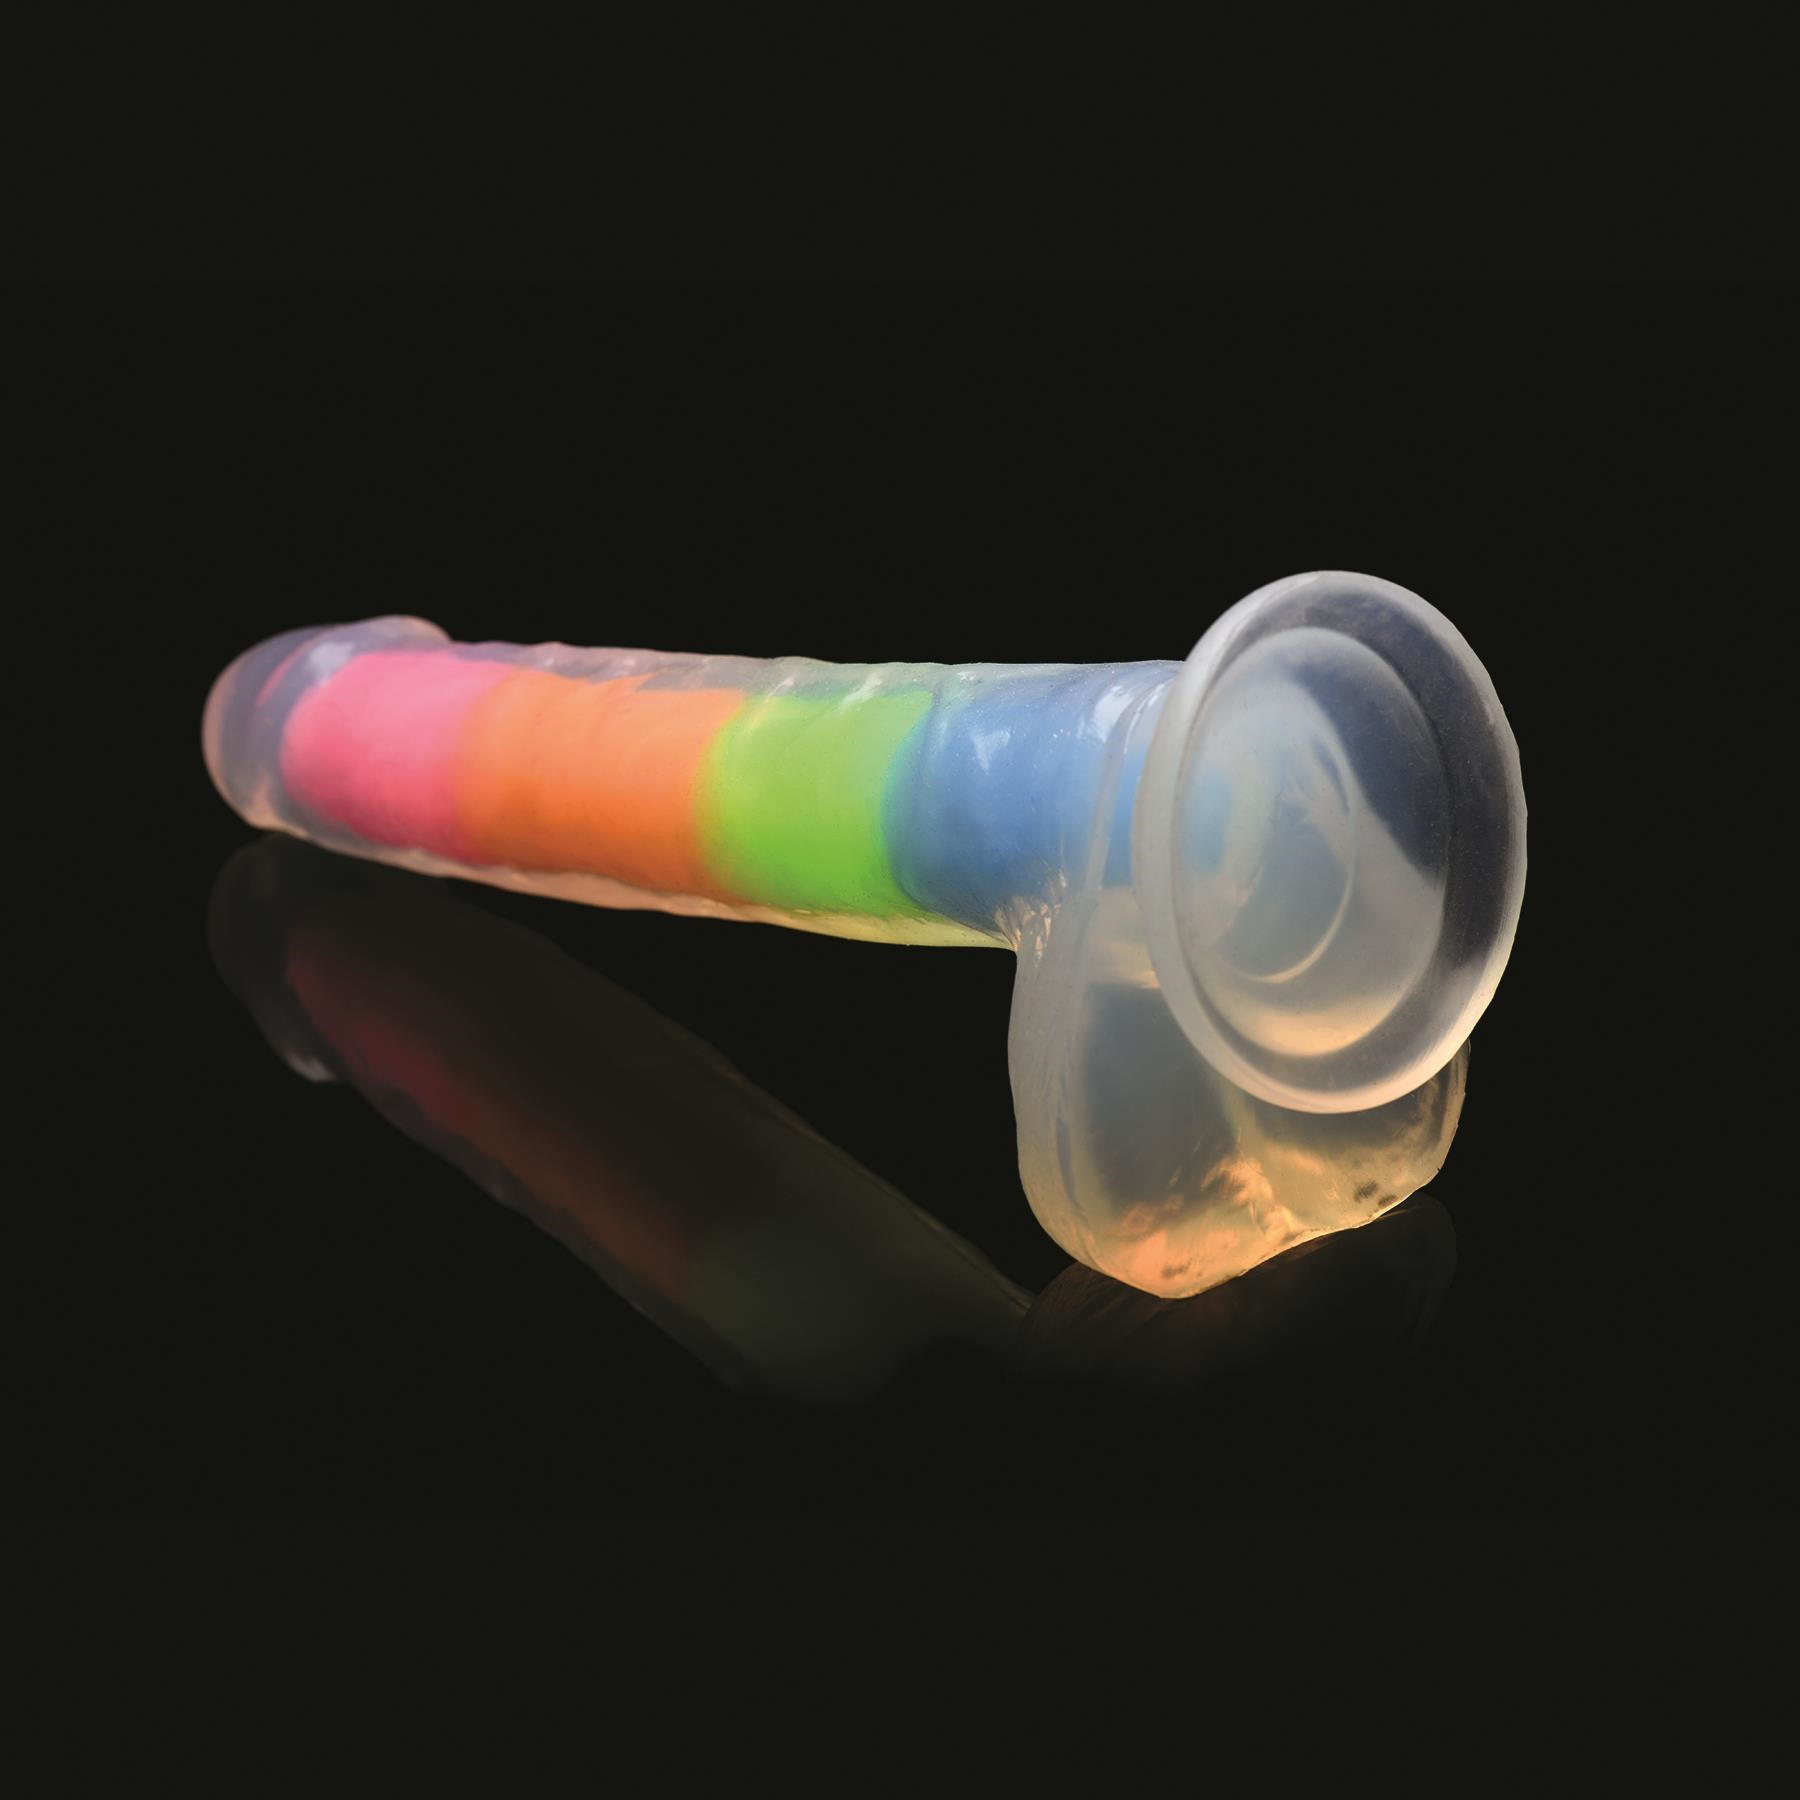 Lollicock 7 Inch Glow in the Dark Rainbow Dildo With Balls - Product Shot #4